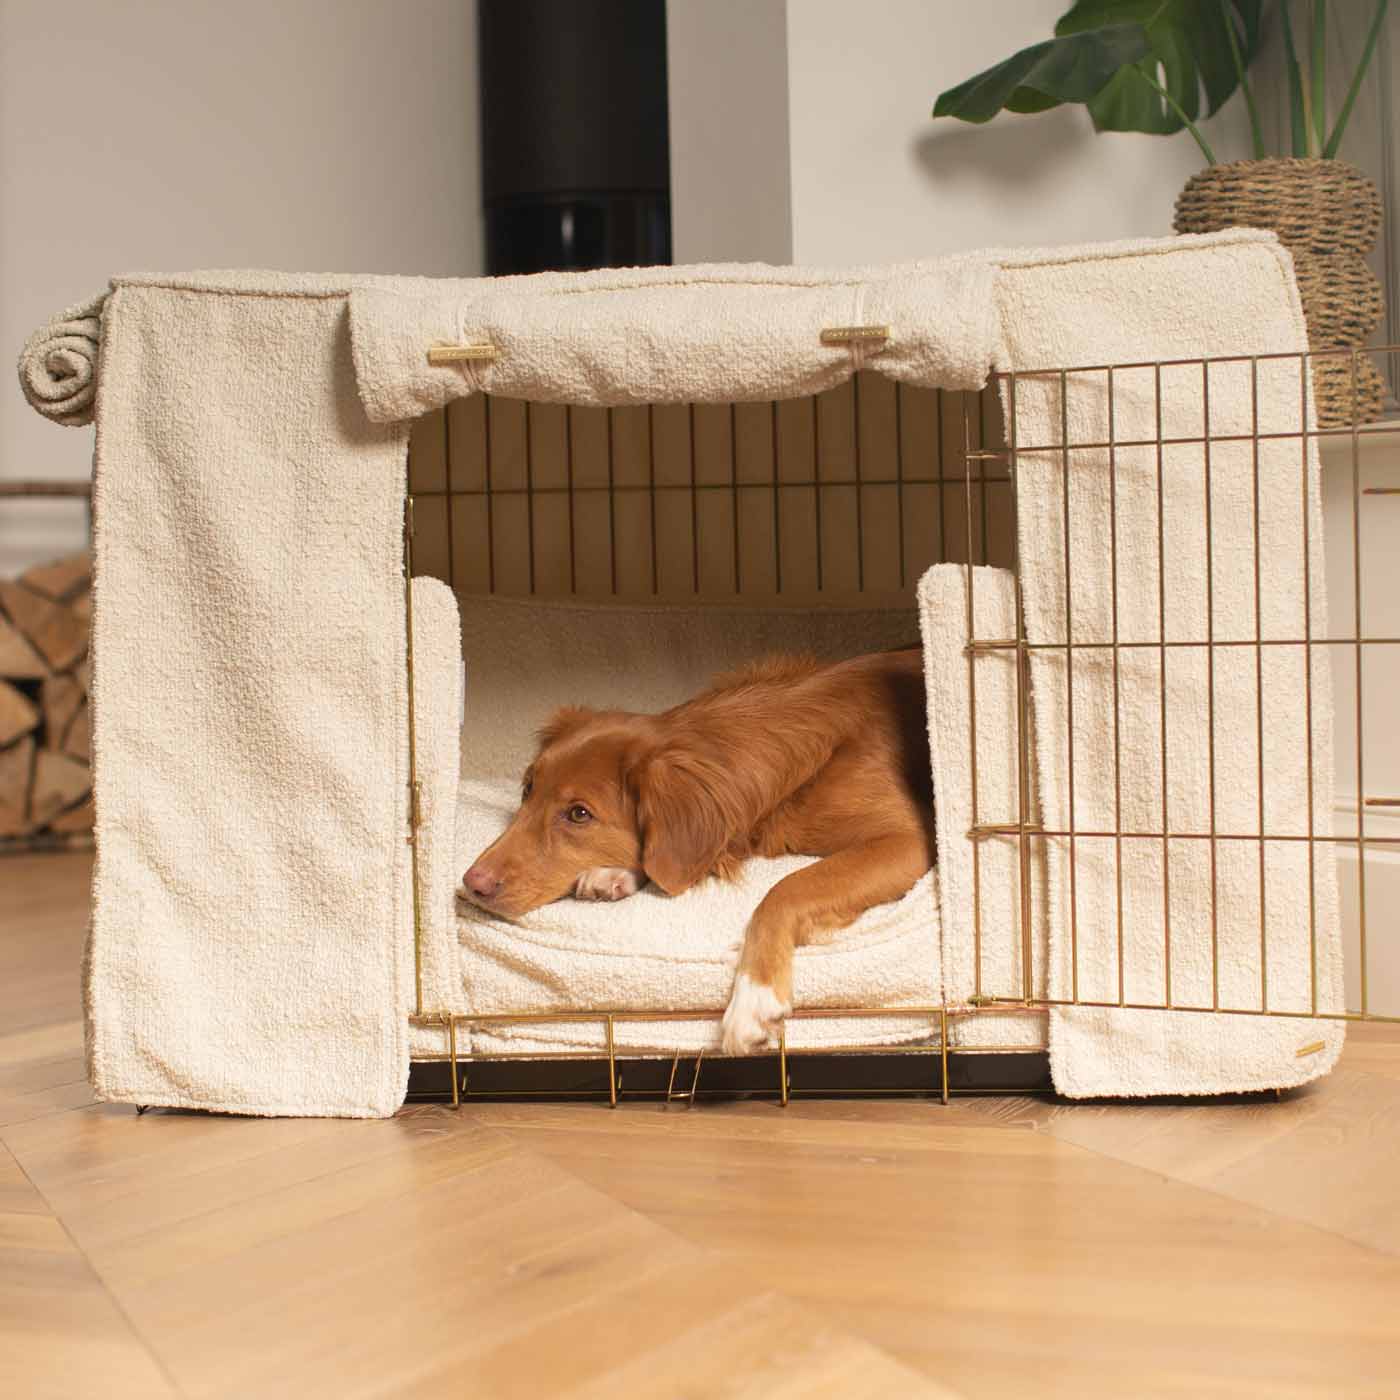 Luxury Heavy Duty Dog Crate, In Stunning Ivory Bouclé Crate Set, The Perfect Dog Crate Set For Building The Ultimate Pet Den! Dog Crate Cover Available To Personalise at Lords & Labradors